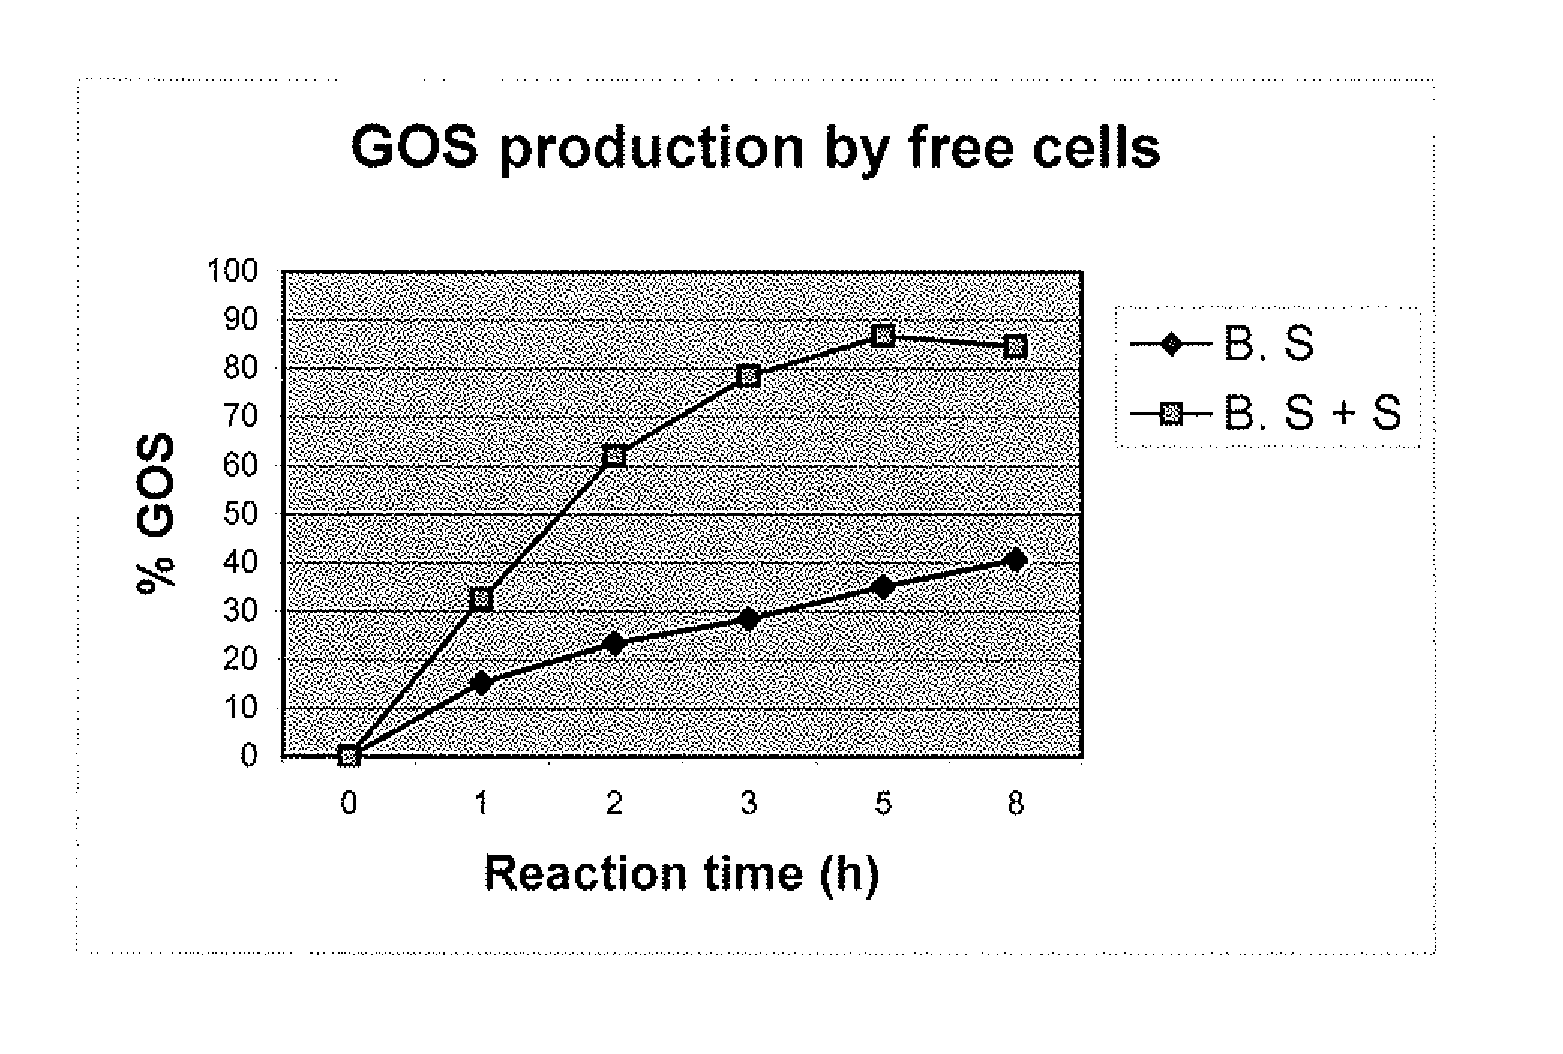 Process for production of galactooligosaccharides (GOS)